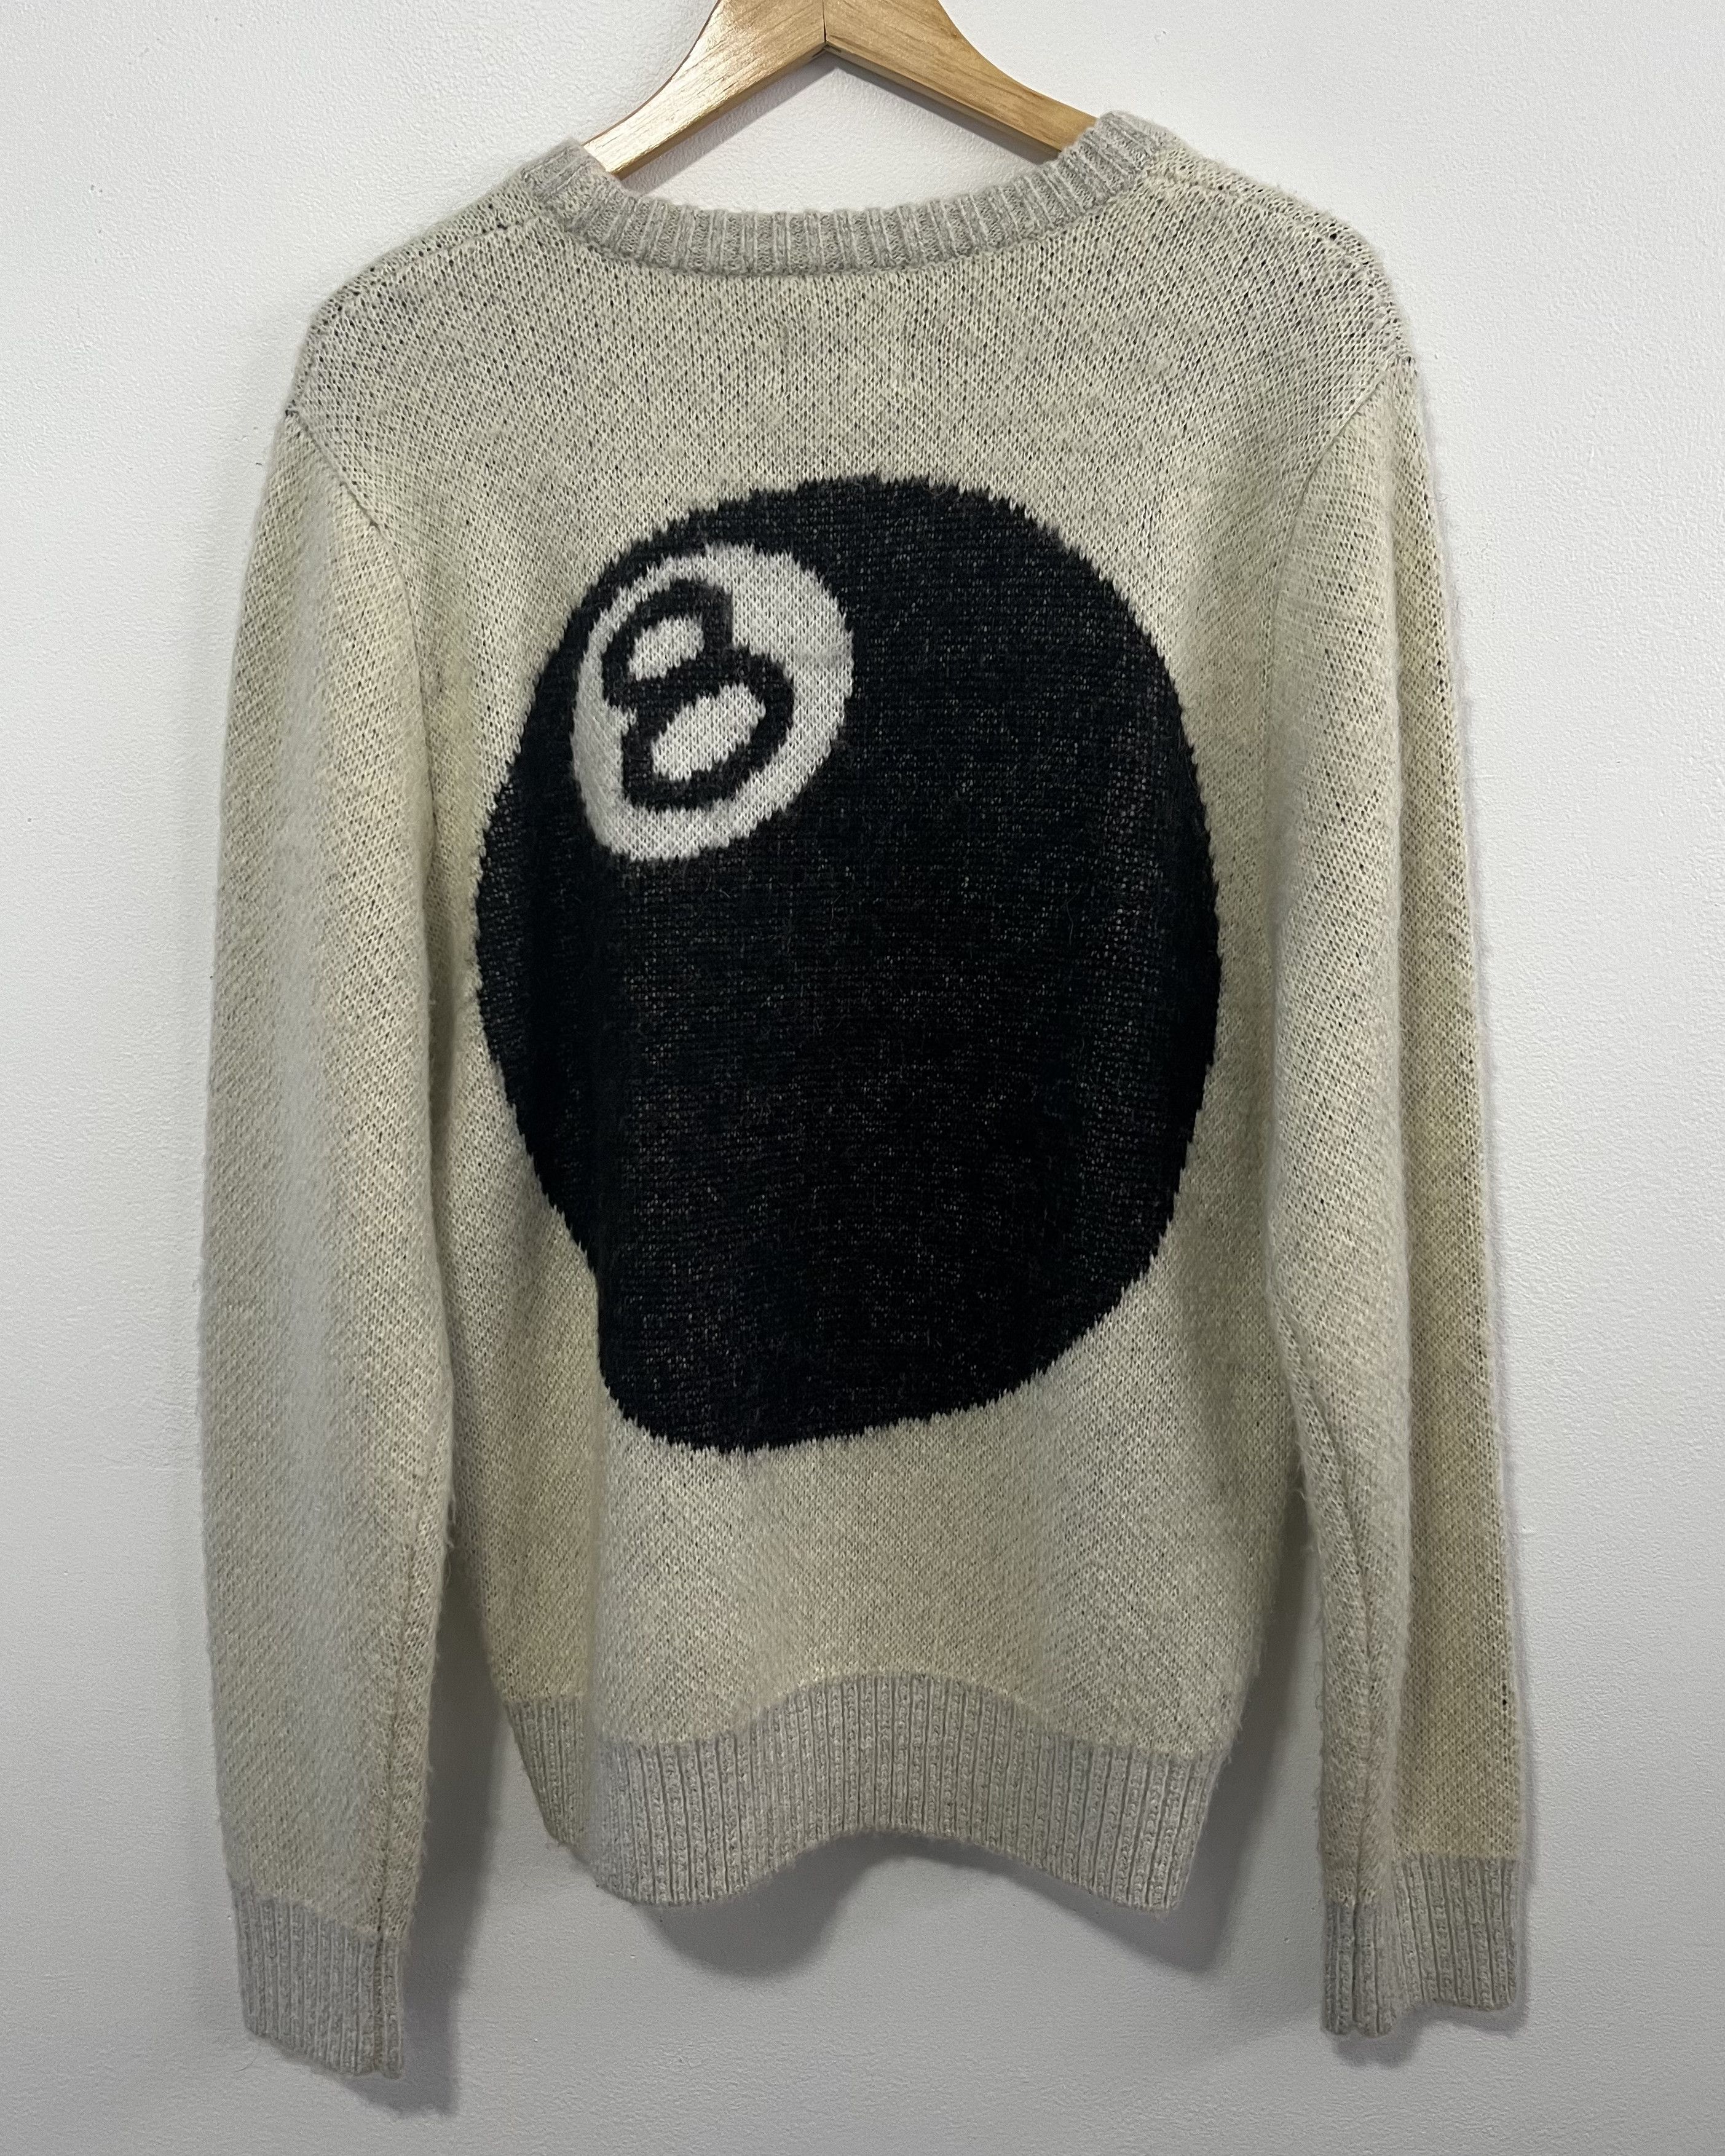 Stussy 8 Ball Sweater | Grailed